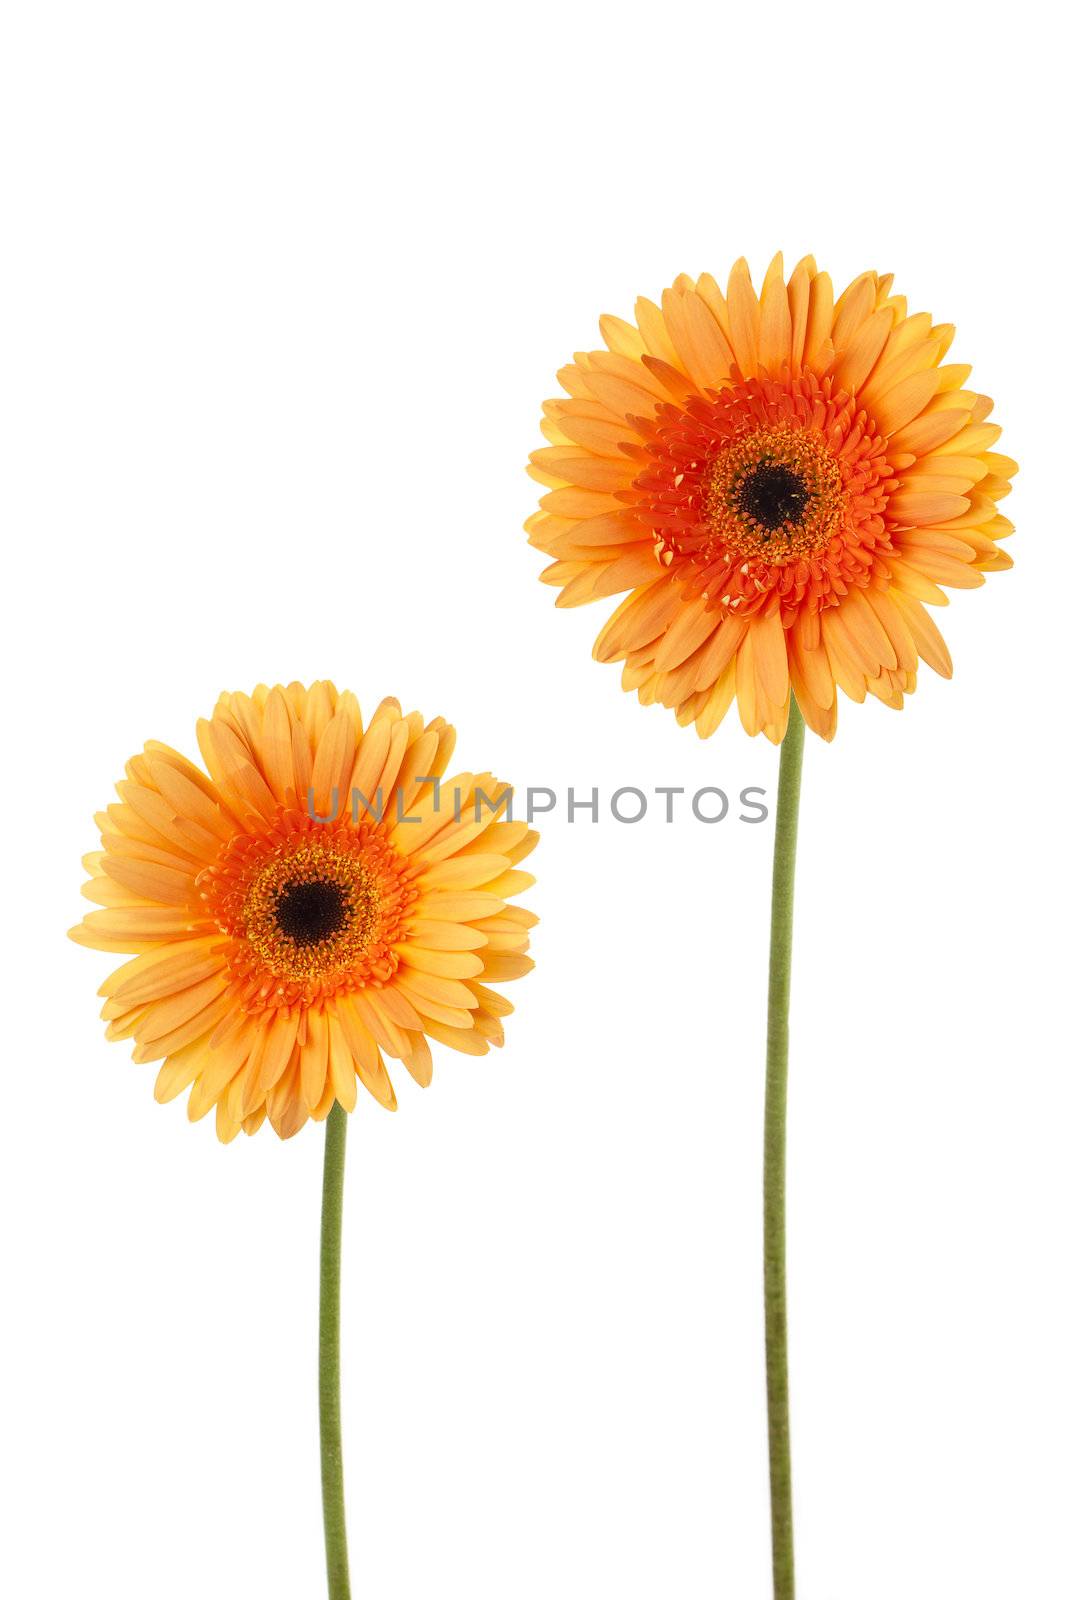 Close-up image of two yellow daisies against white background.